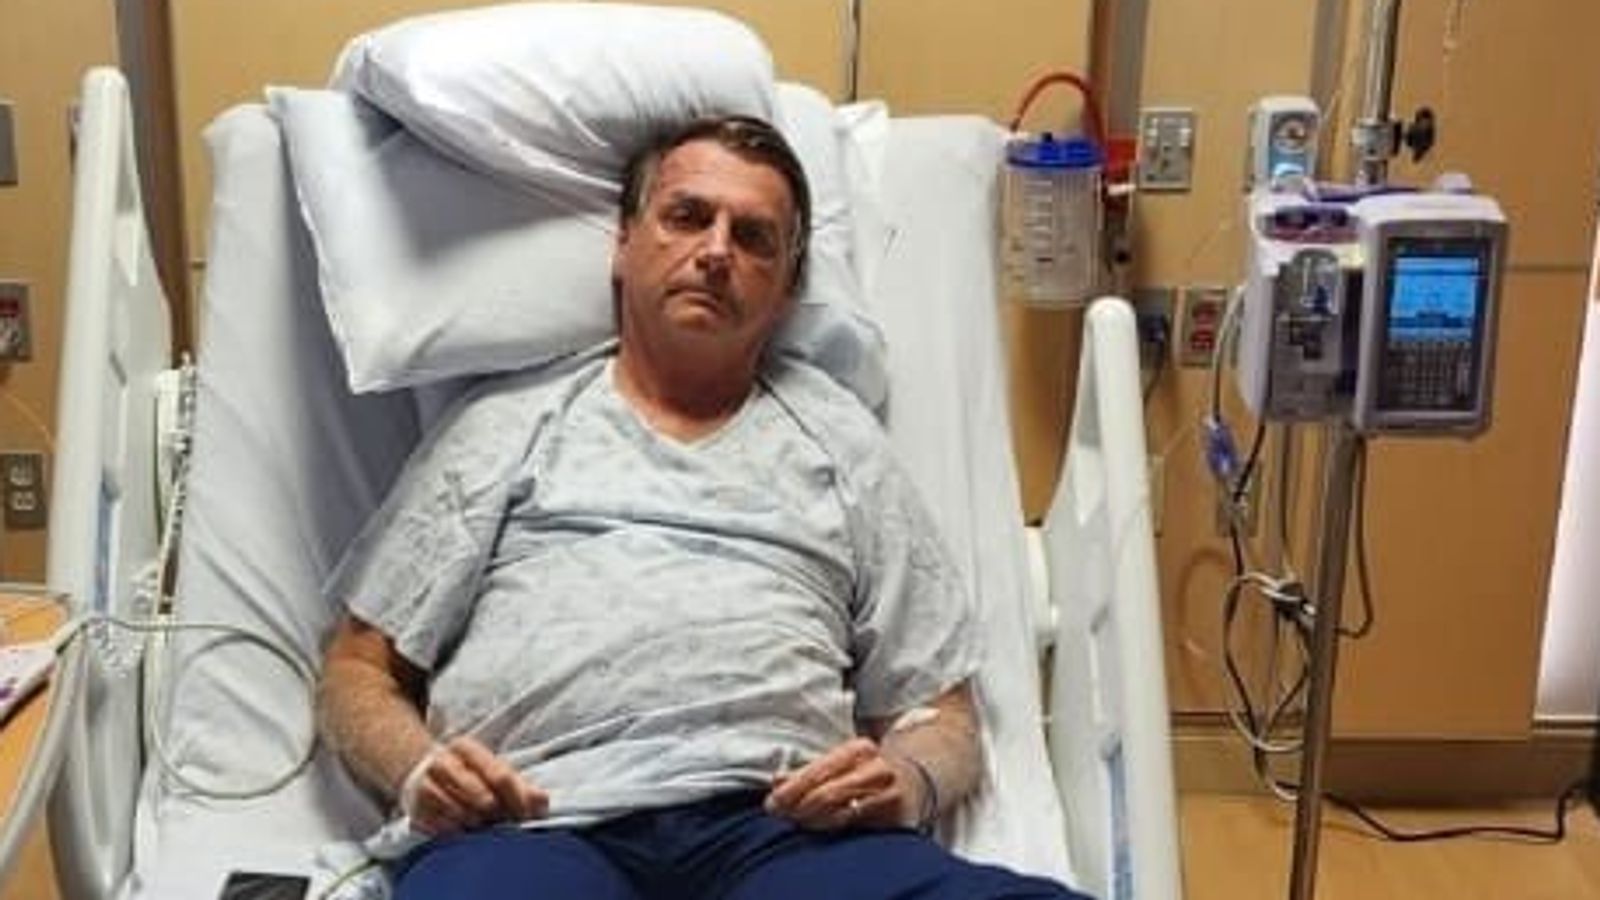 Jair Bolsonaro shares photo of himself in hospital after supporters storm Brazil's Congress